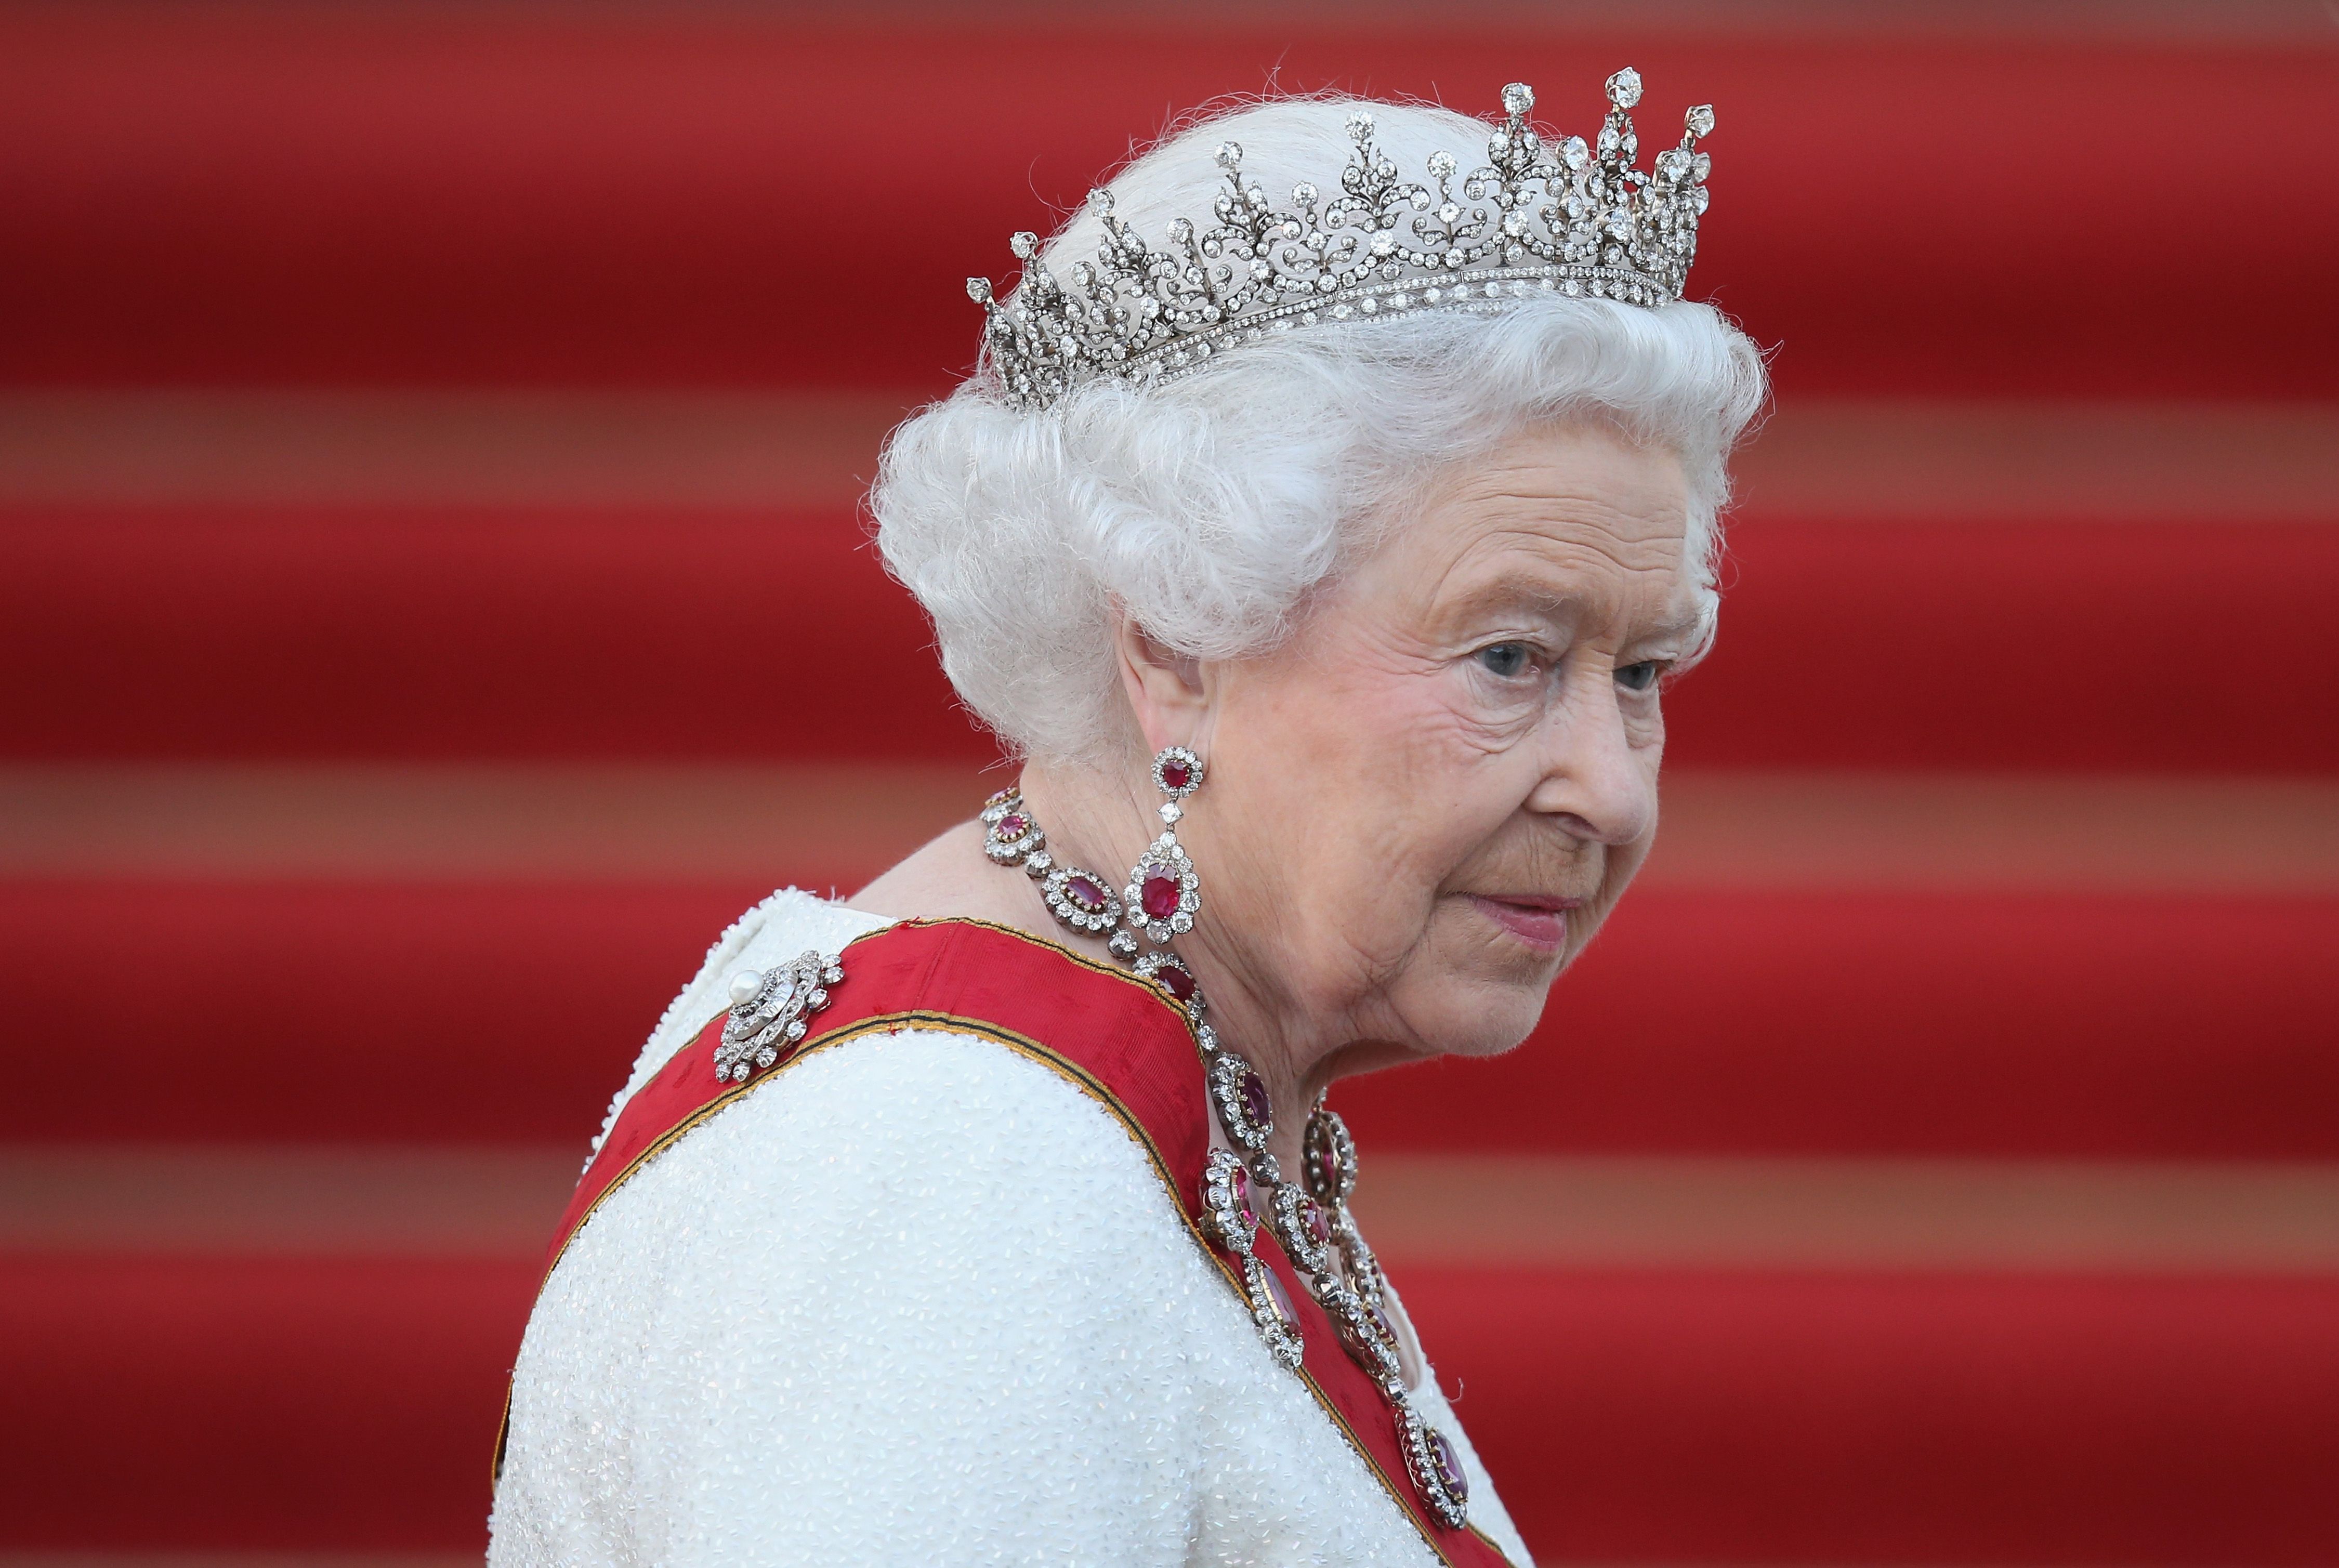 How the Royal Family Will Divide Queen Elizabeth's Extensive Jewelry Collection